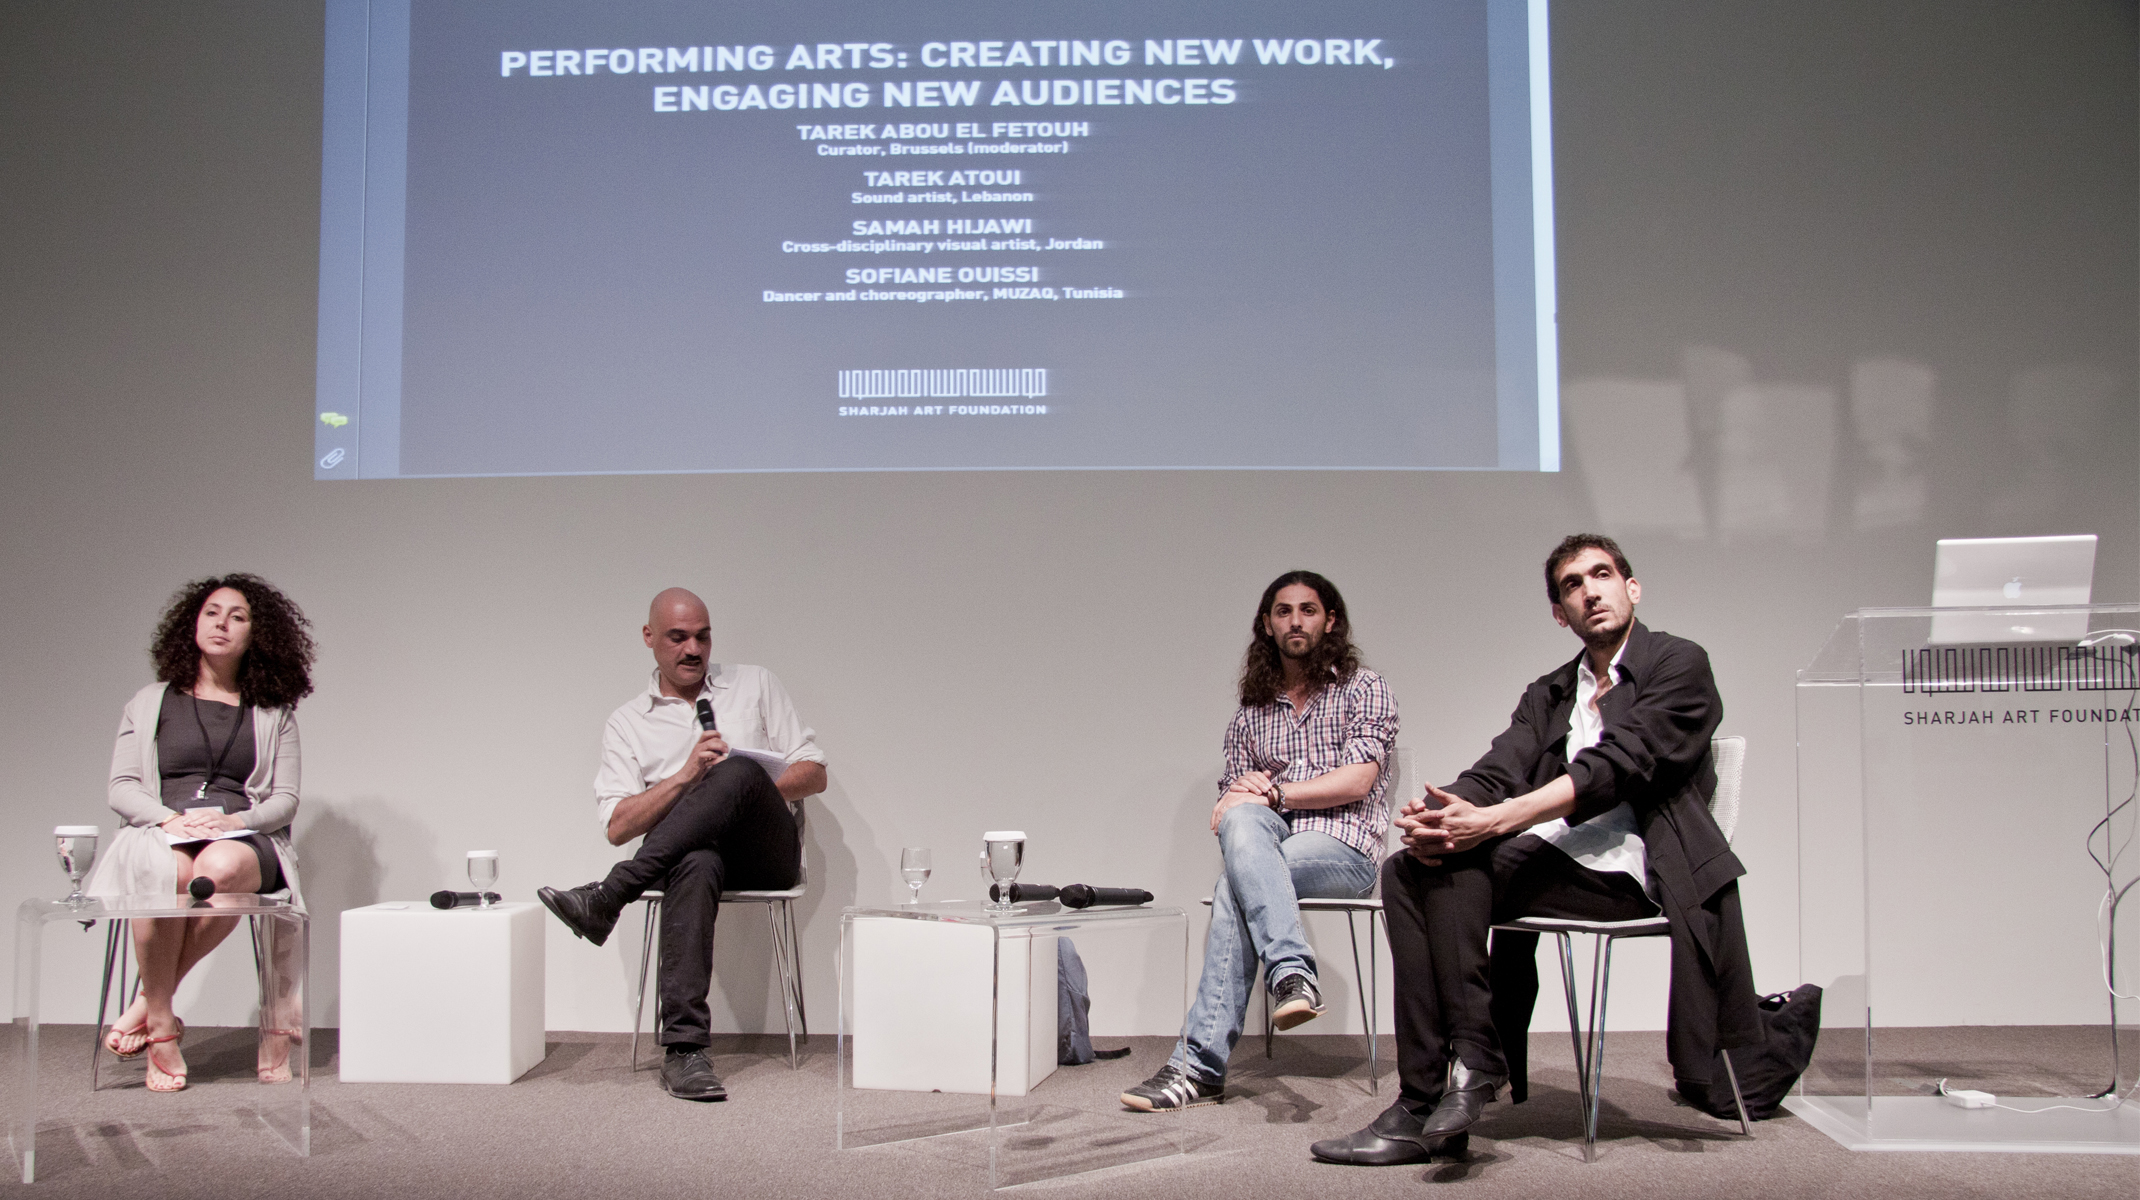 Performing Arts: Creating New Work, Engaging New Audiences Image